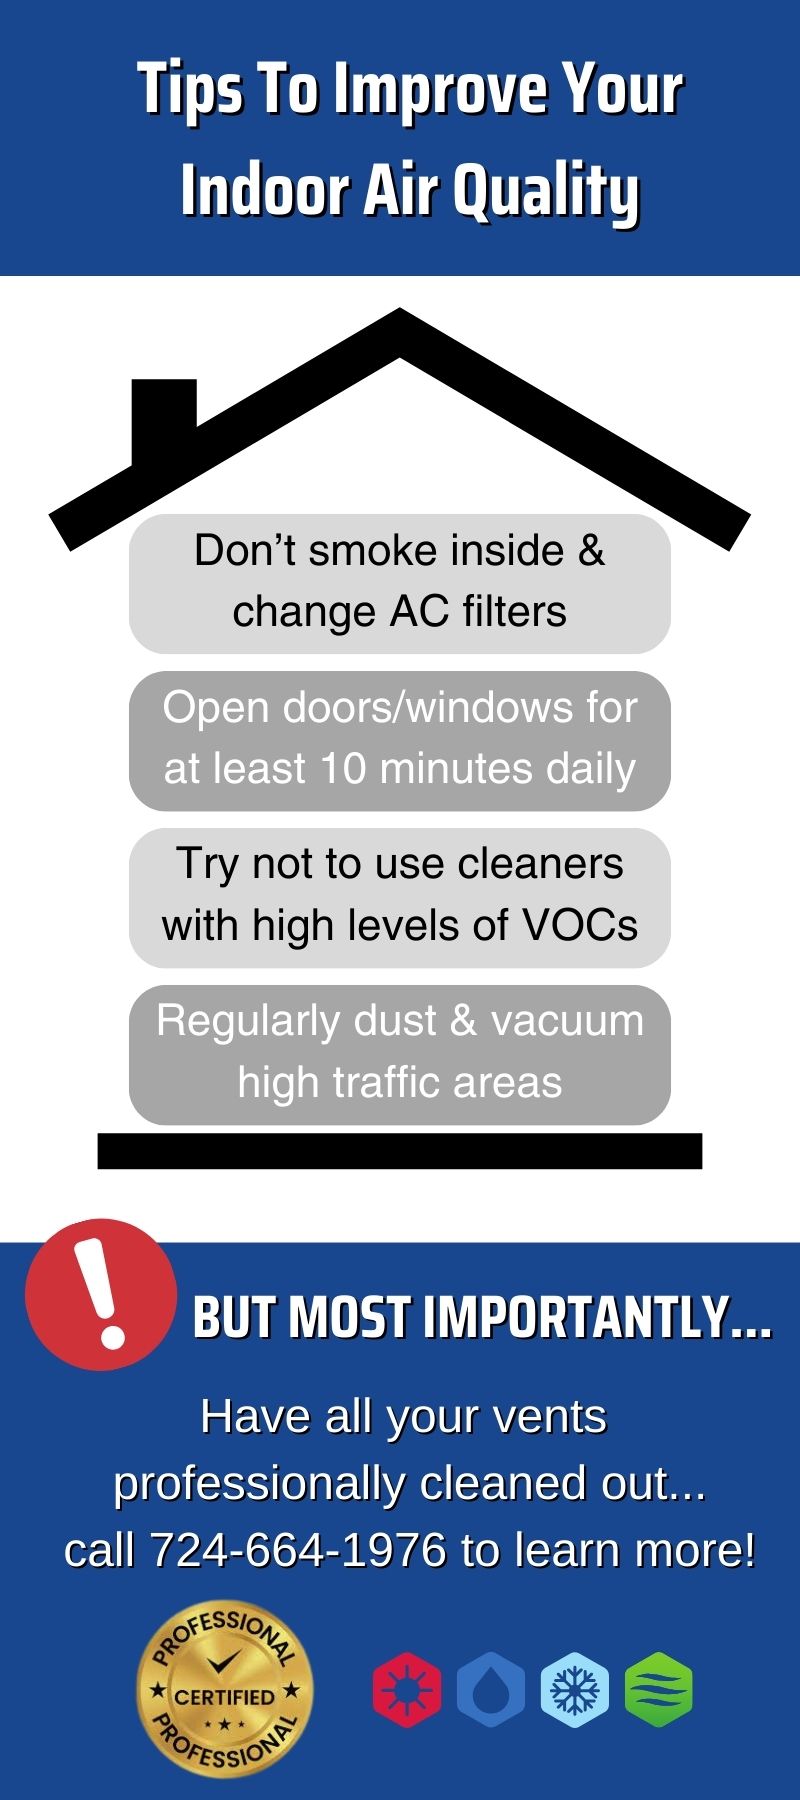 original infographic on tips to improve indoor air quality